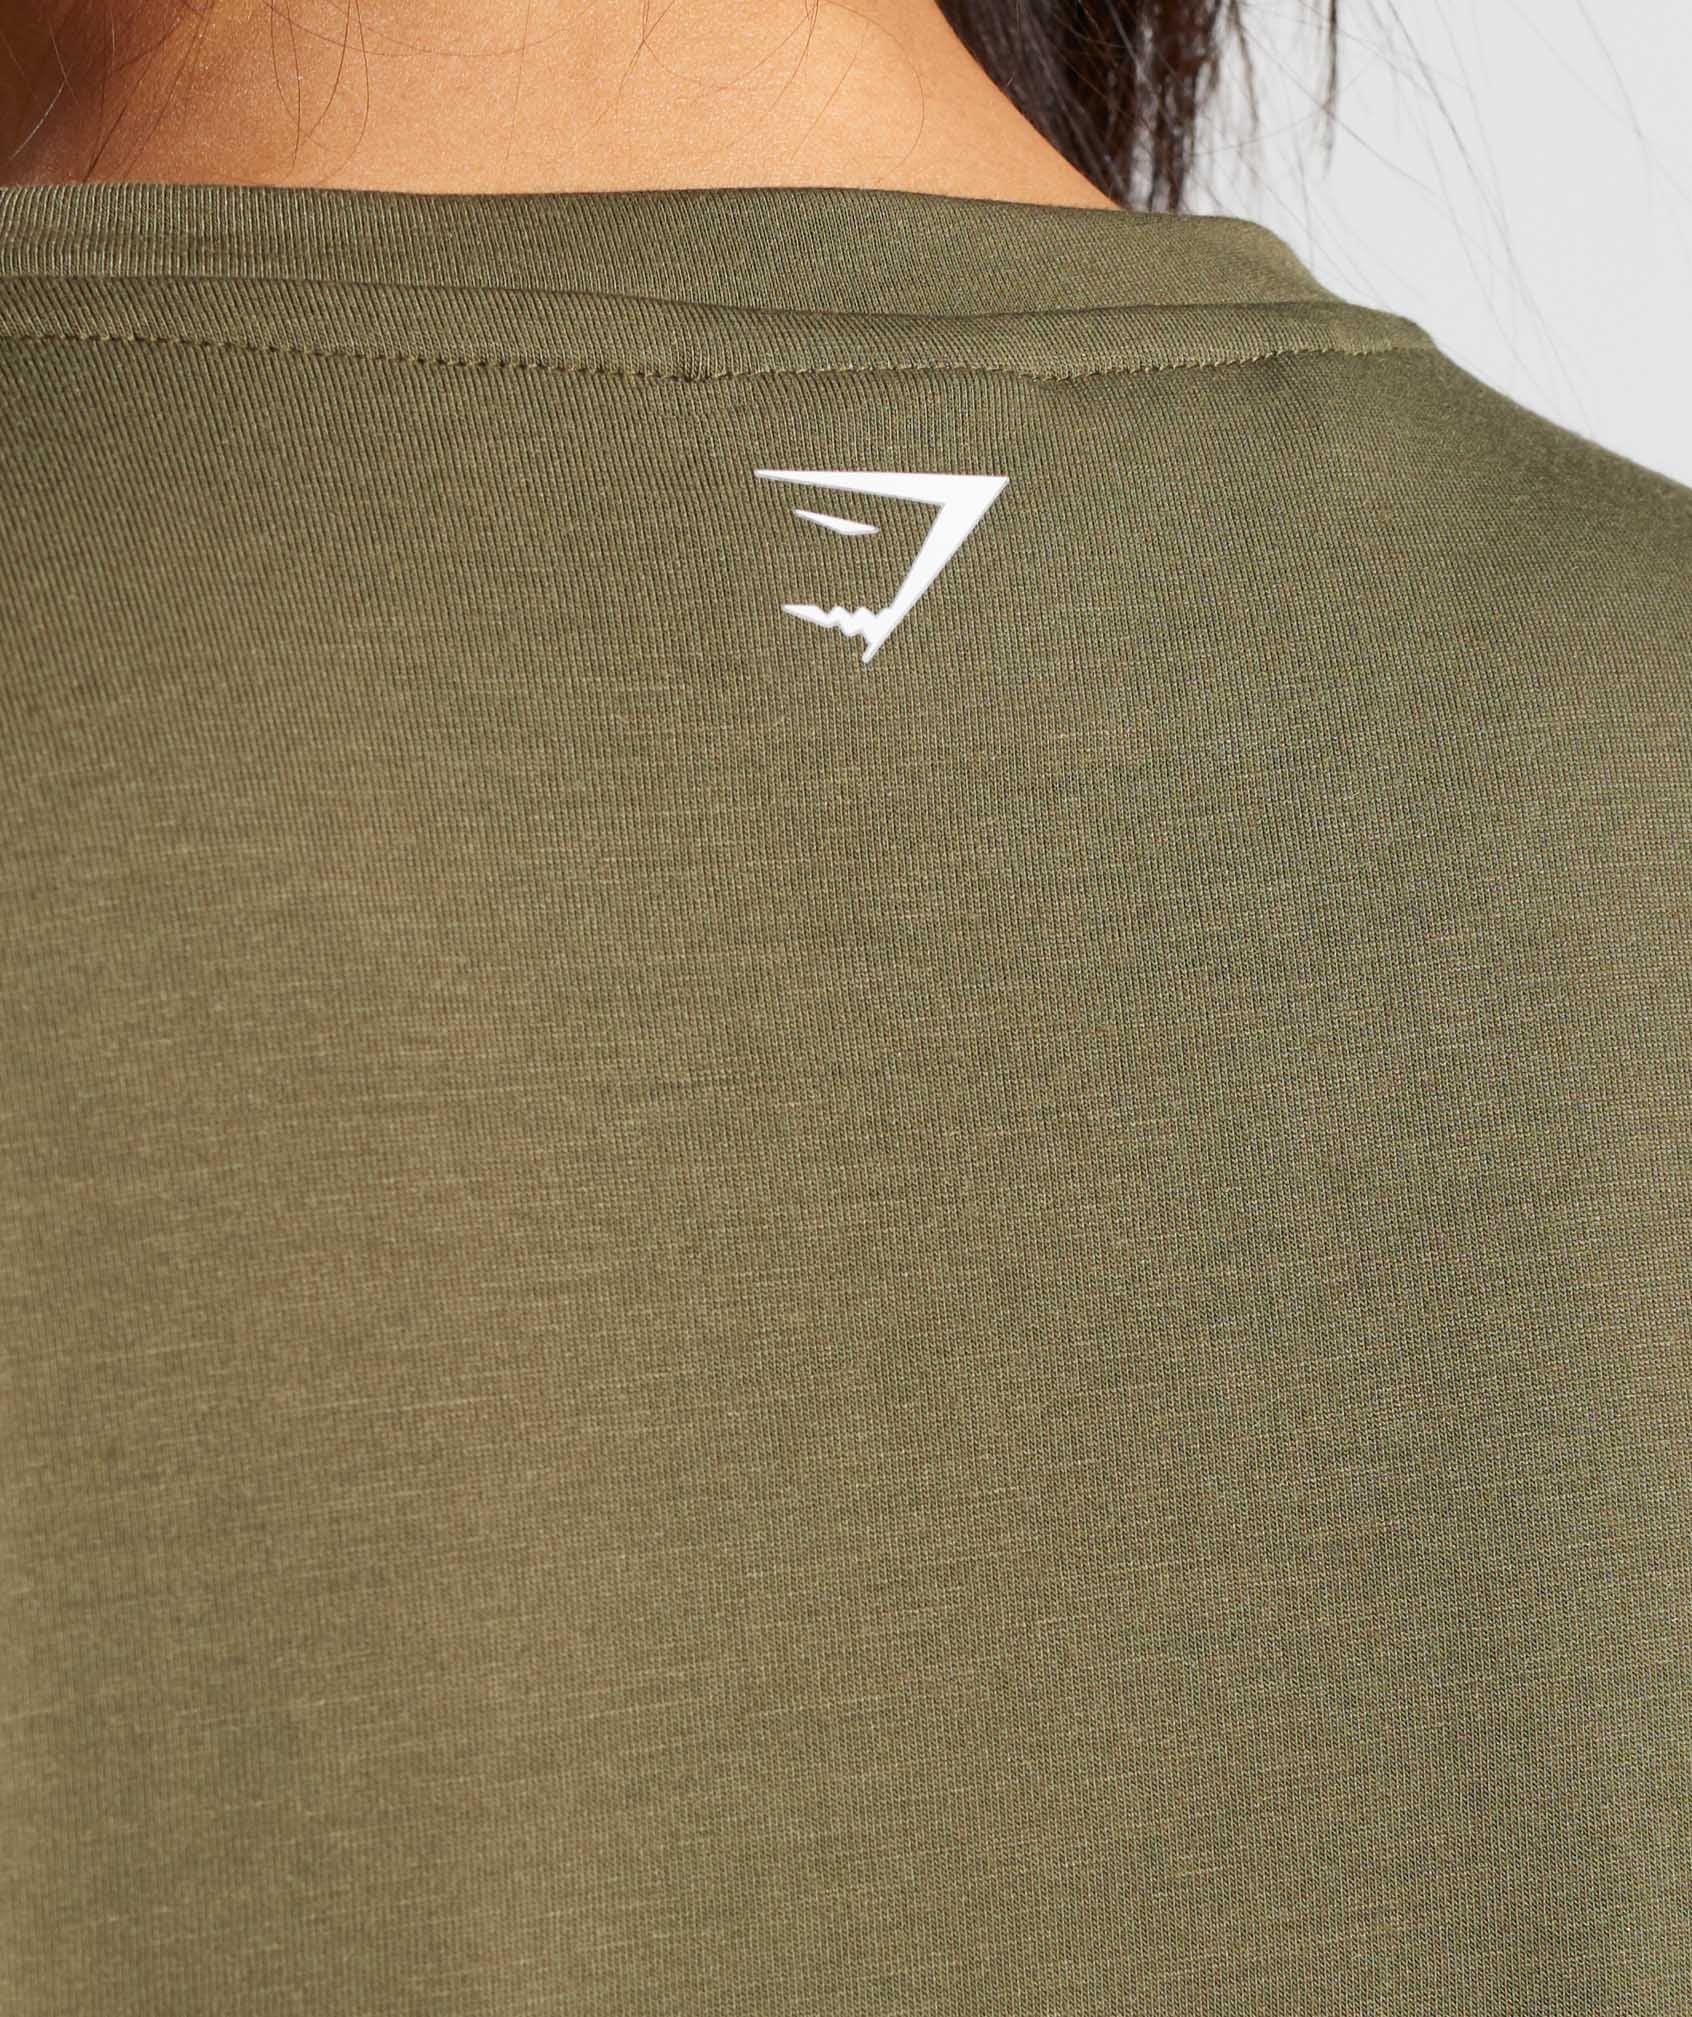 Essential Be a Visionary Tee in Khaki - view 6